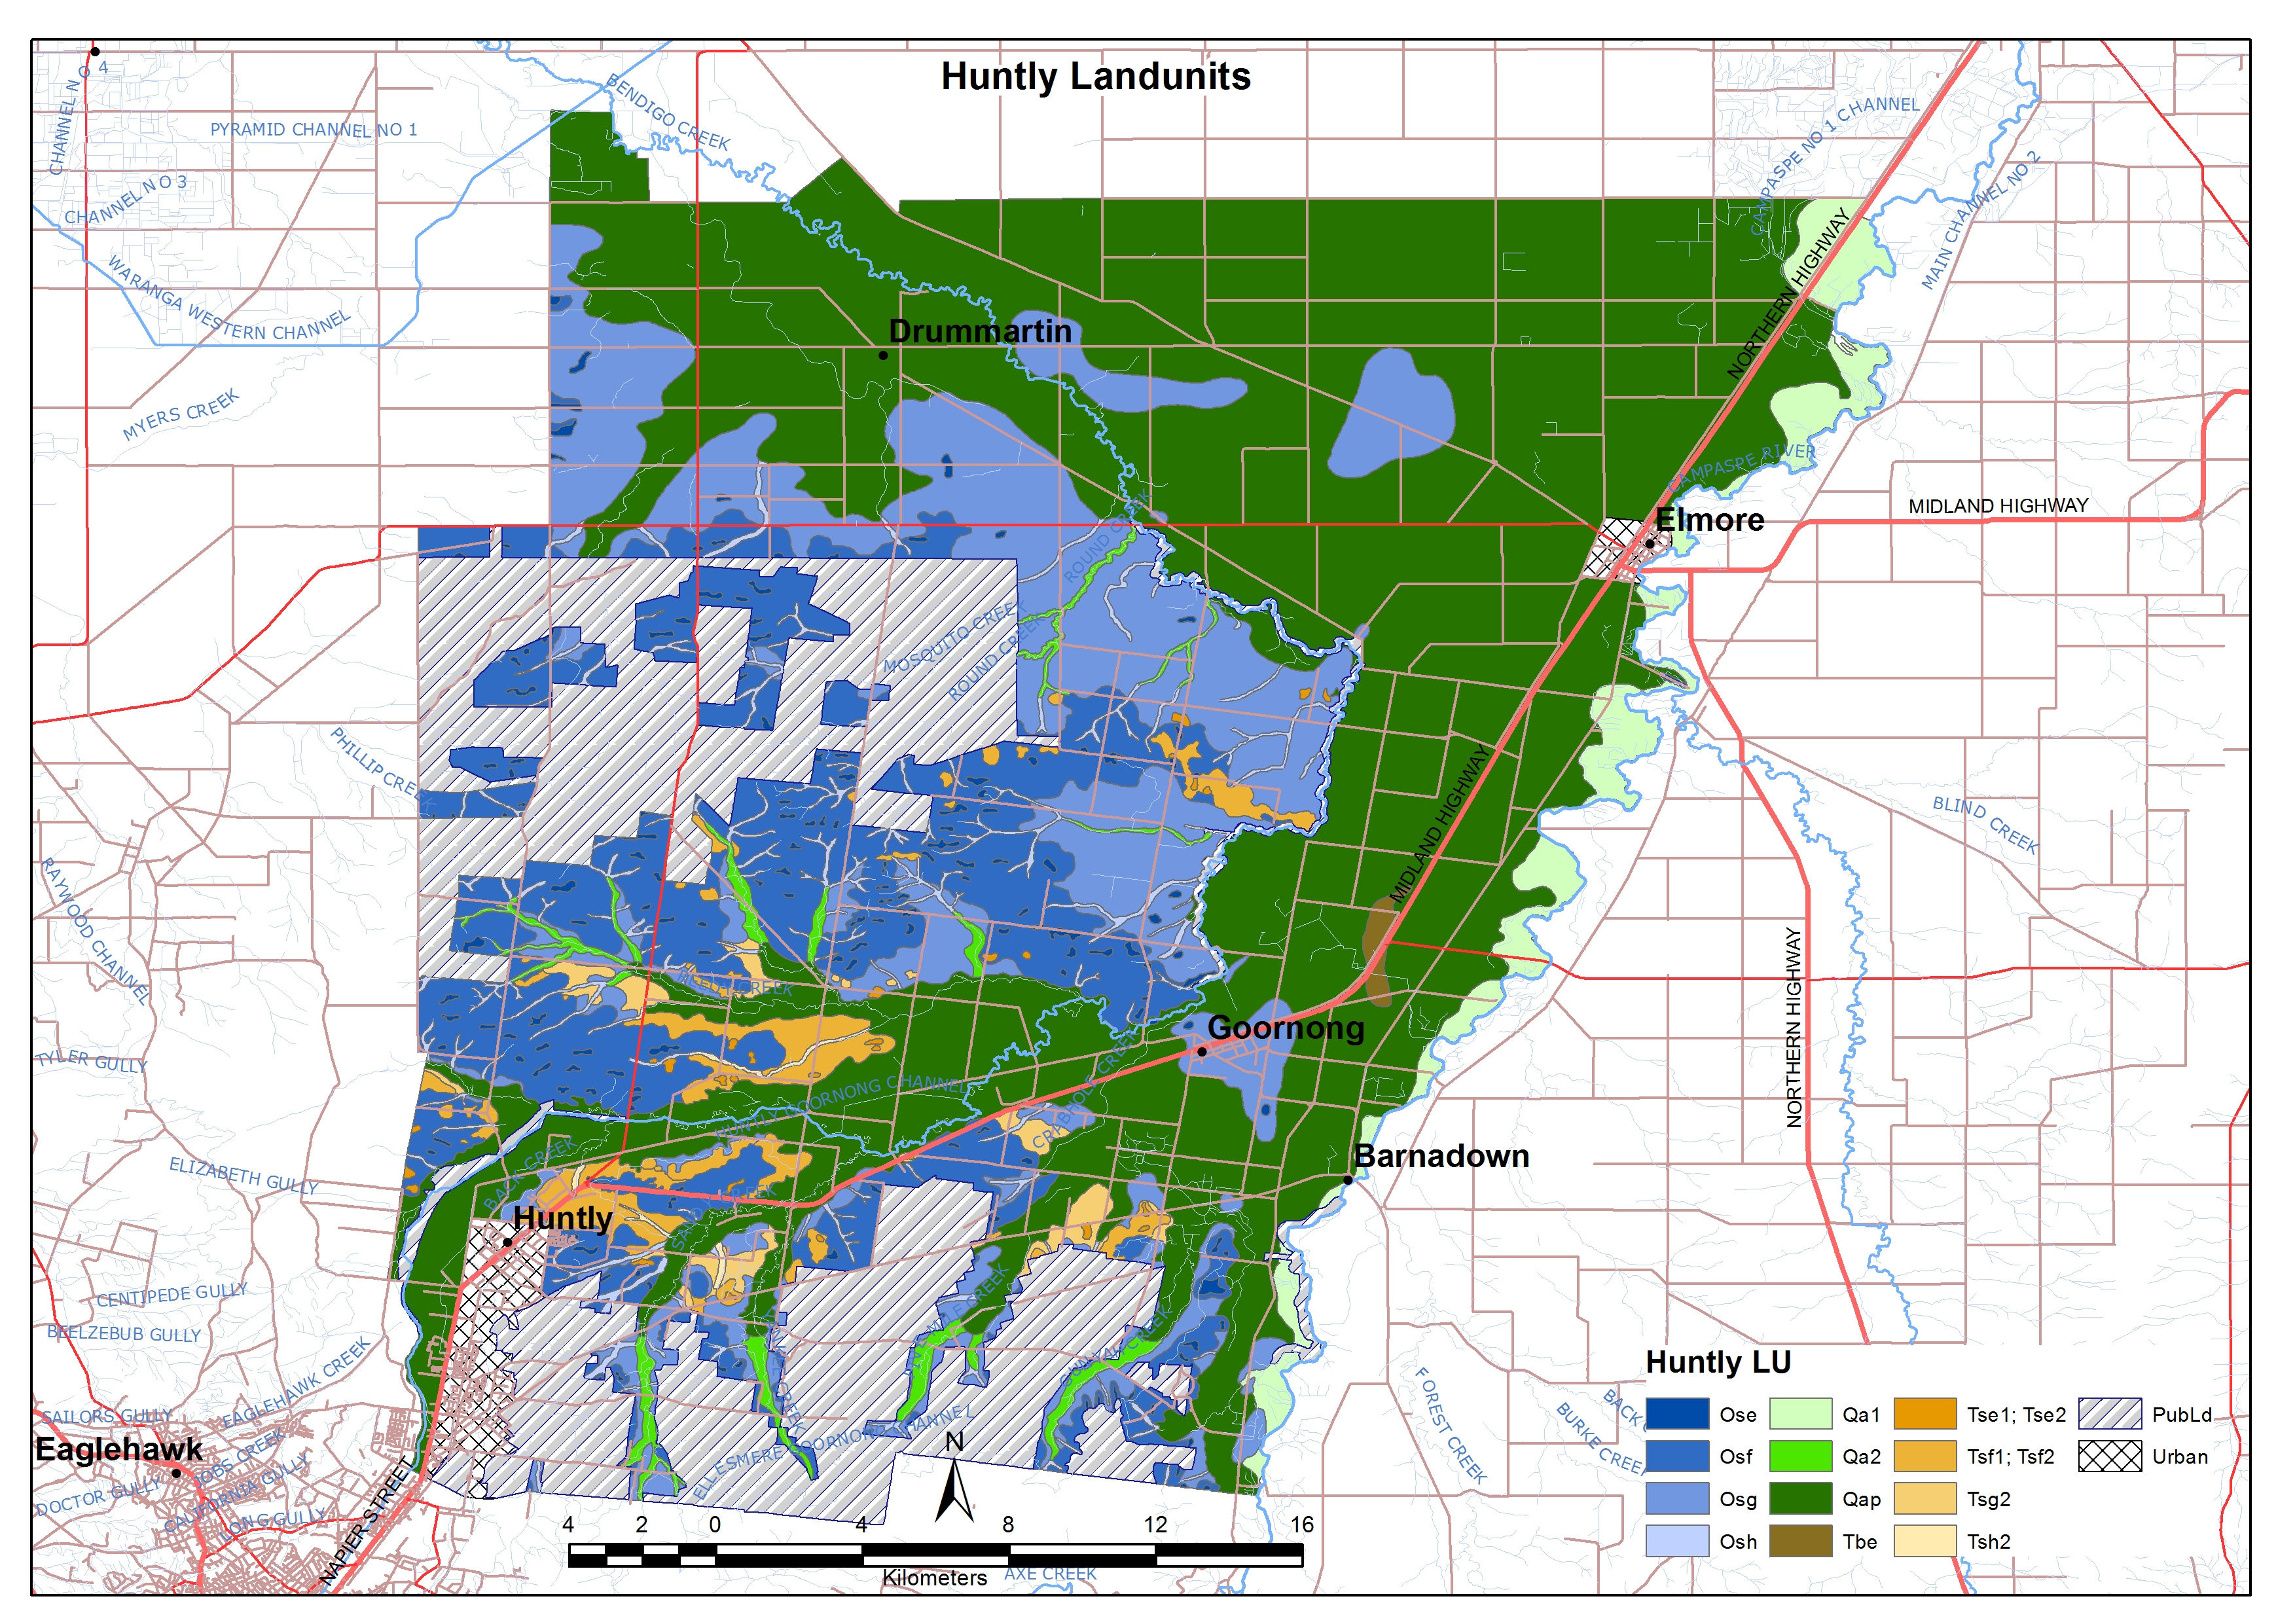 map of the land capablity study for huntly